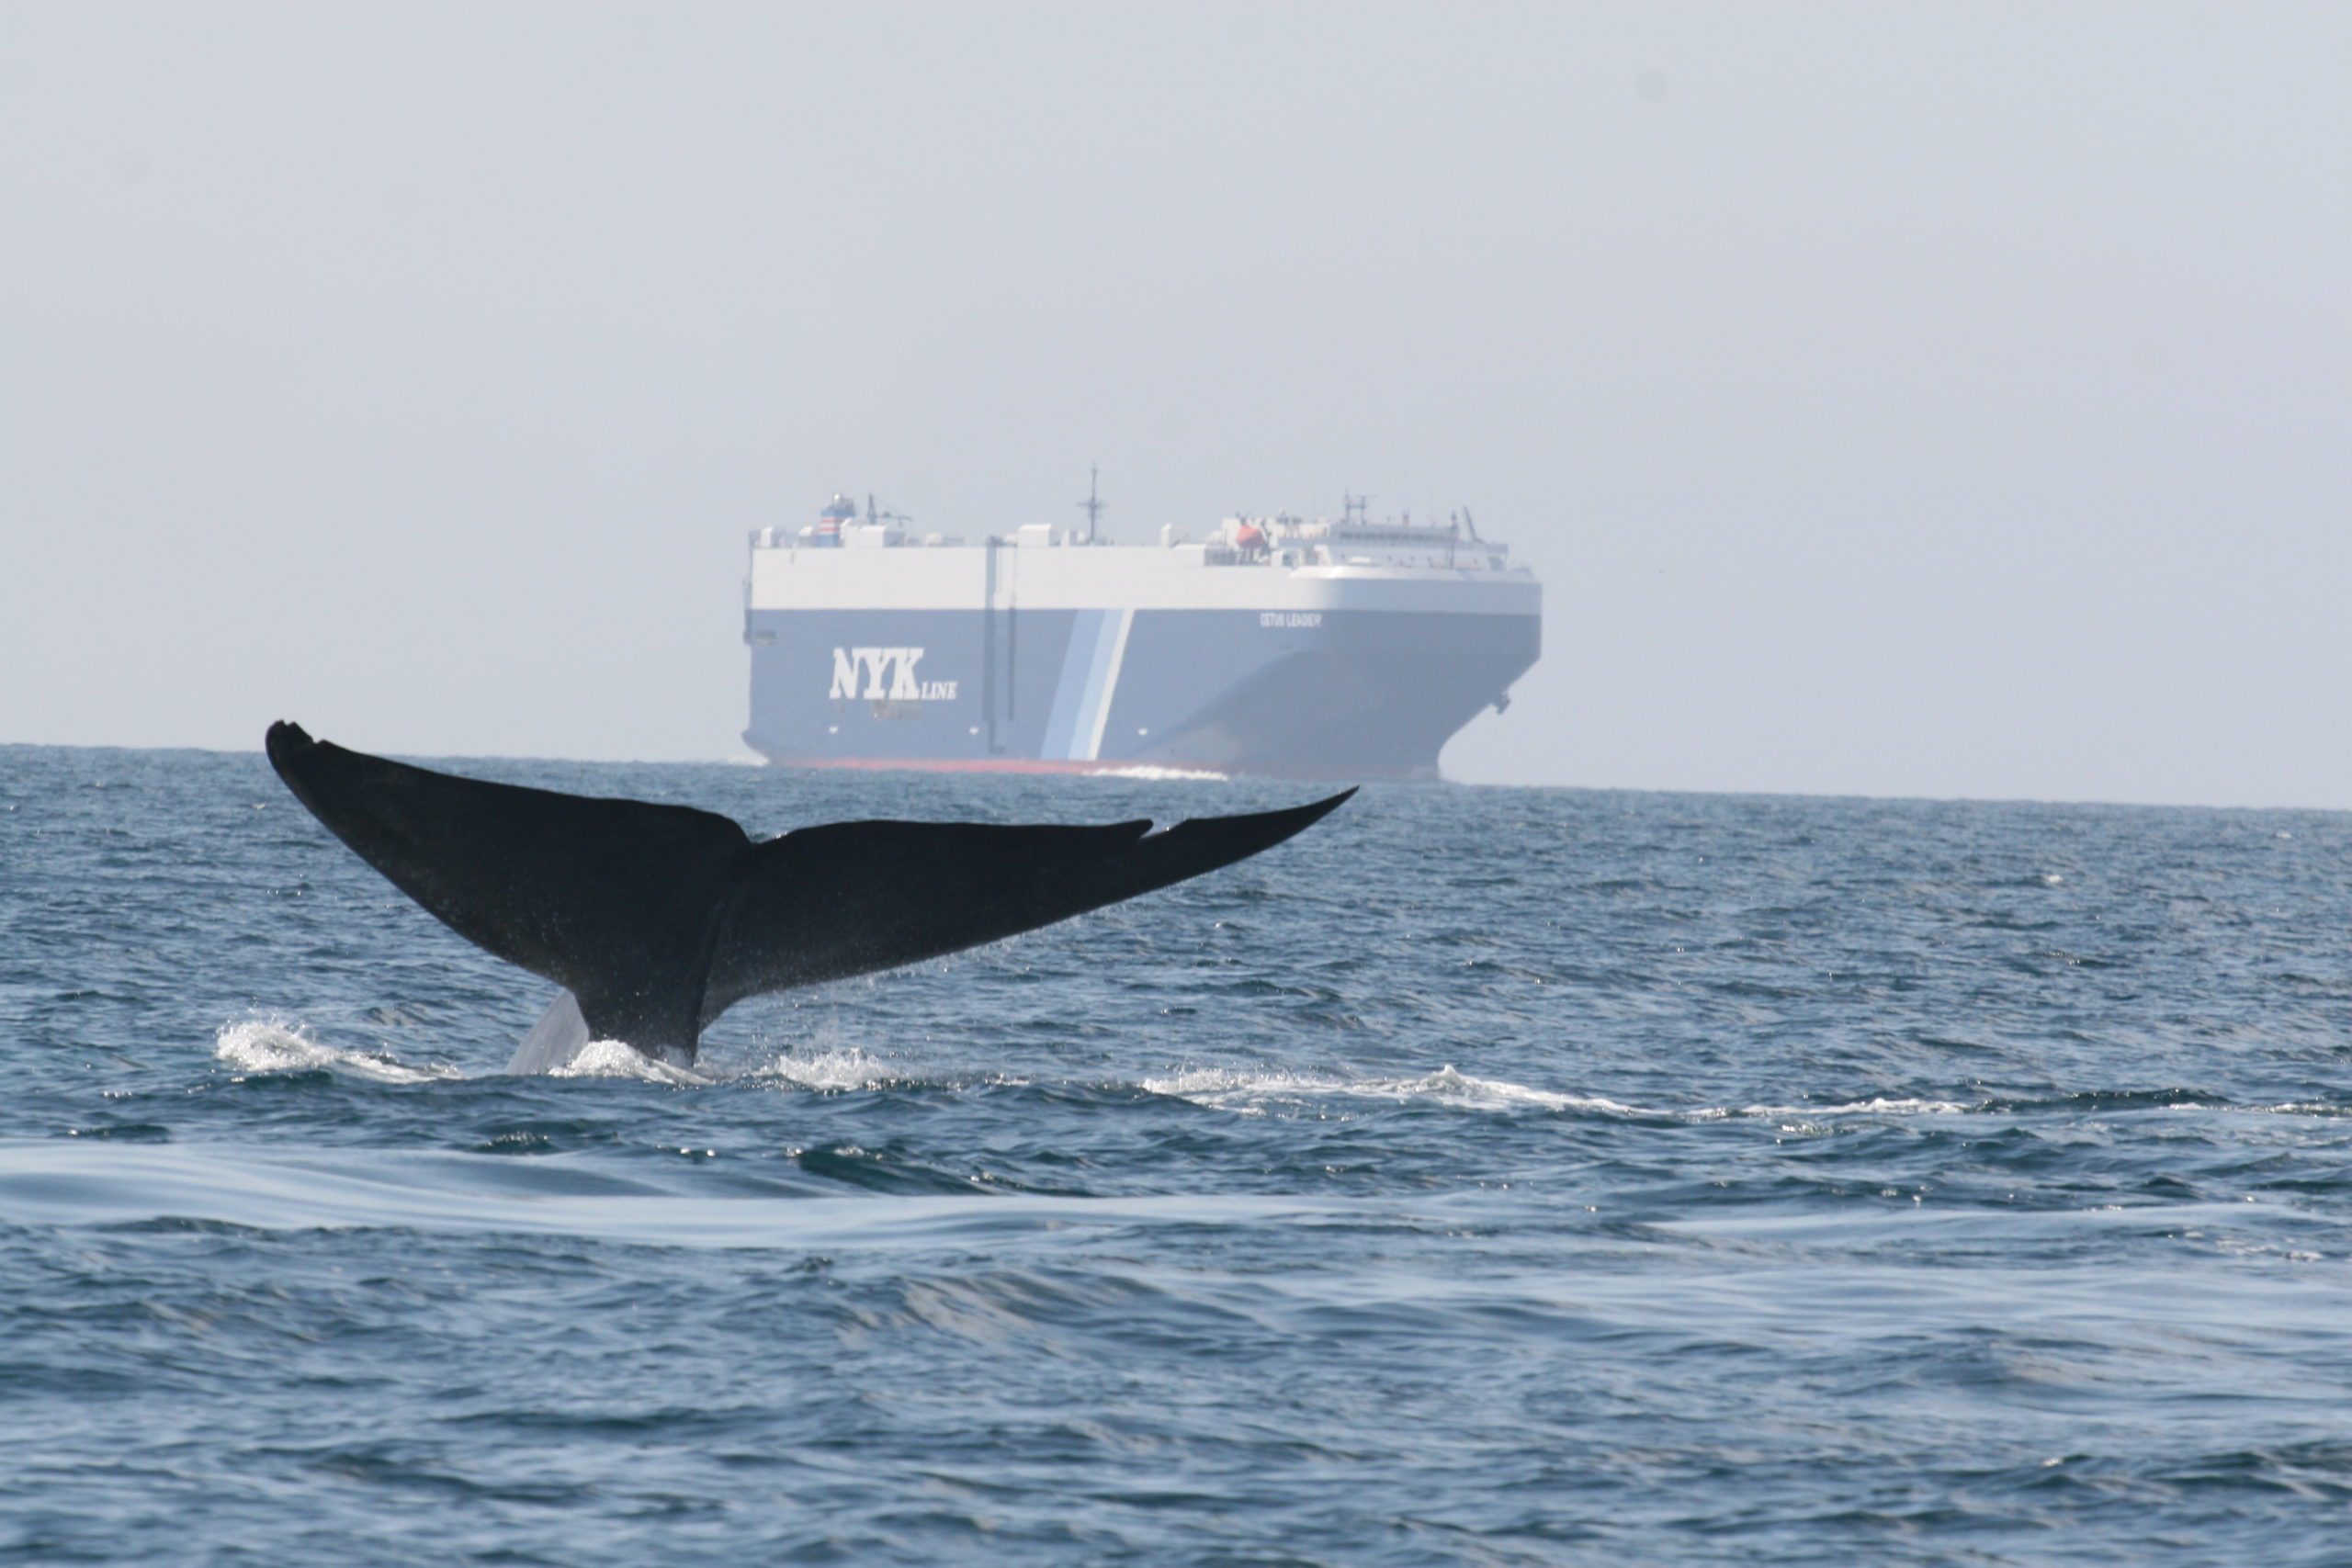 Sixteen global shipping companies slowed cargo ships off California coast to protect blue whales and blue skies